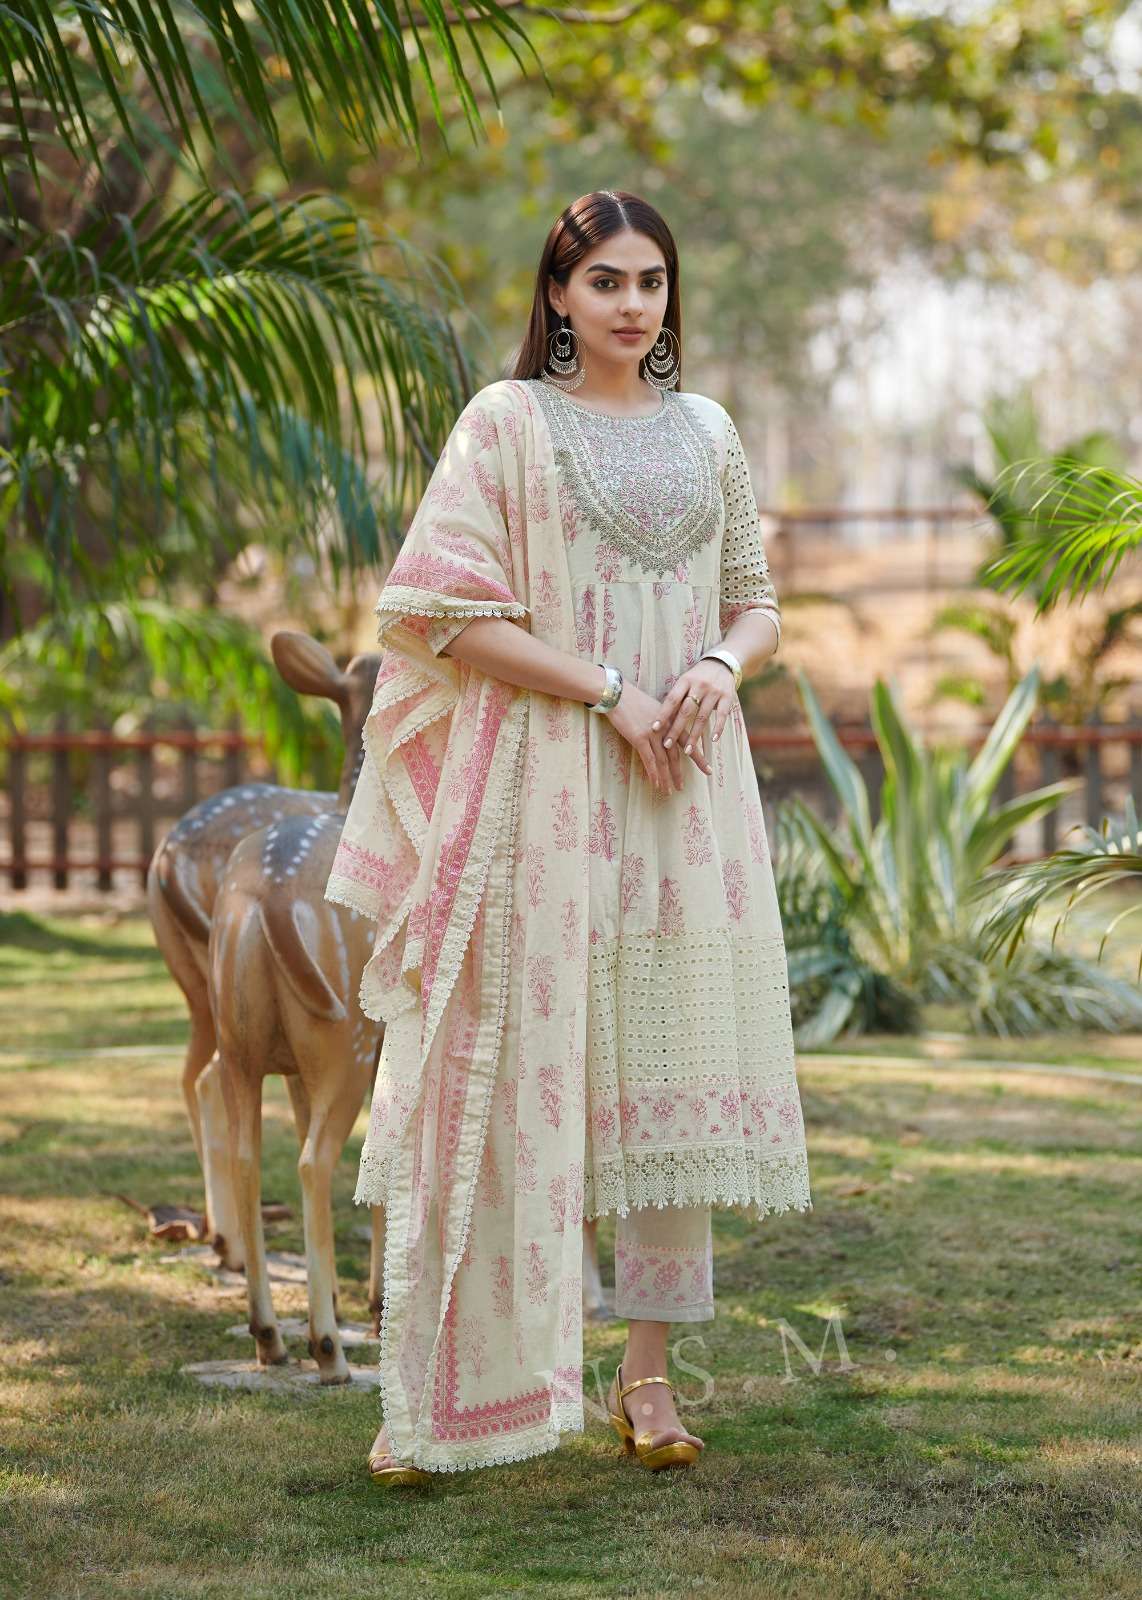 catalogue name raja rani heavy shiffli  stiched suit top heavy embroidery neck work with pure cotton print anarkali style with shiffli panel work readymade suit  